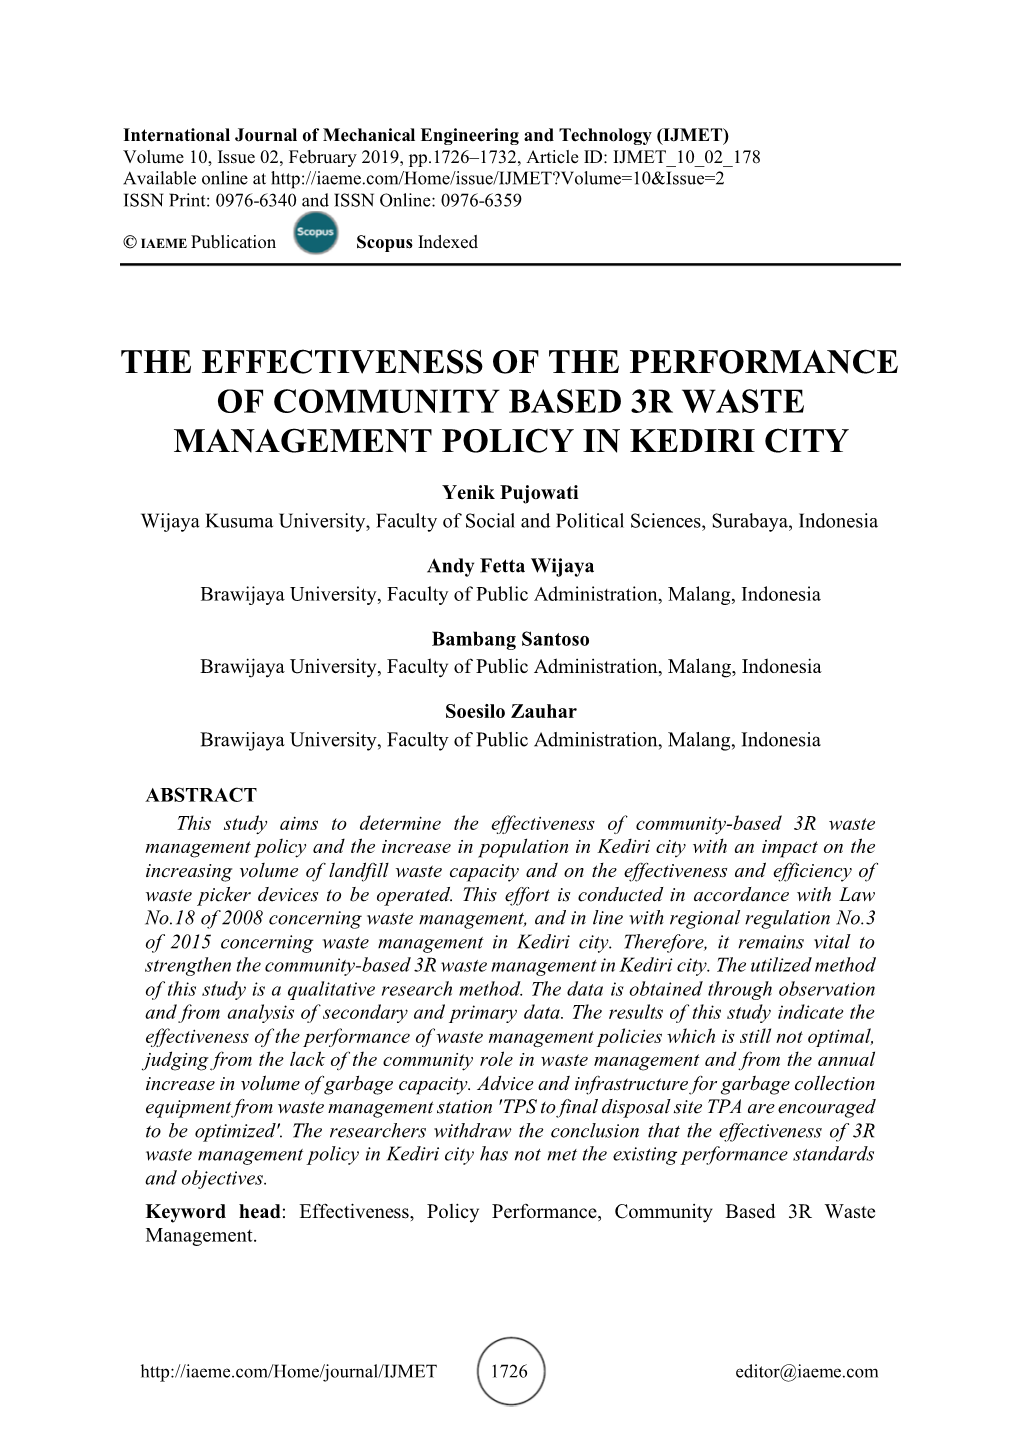 The Effectiveness of the Performance of Community Based 3R Waste Management Policy in Kediri City